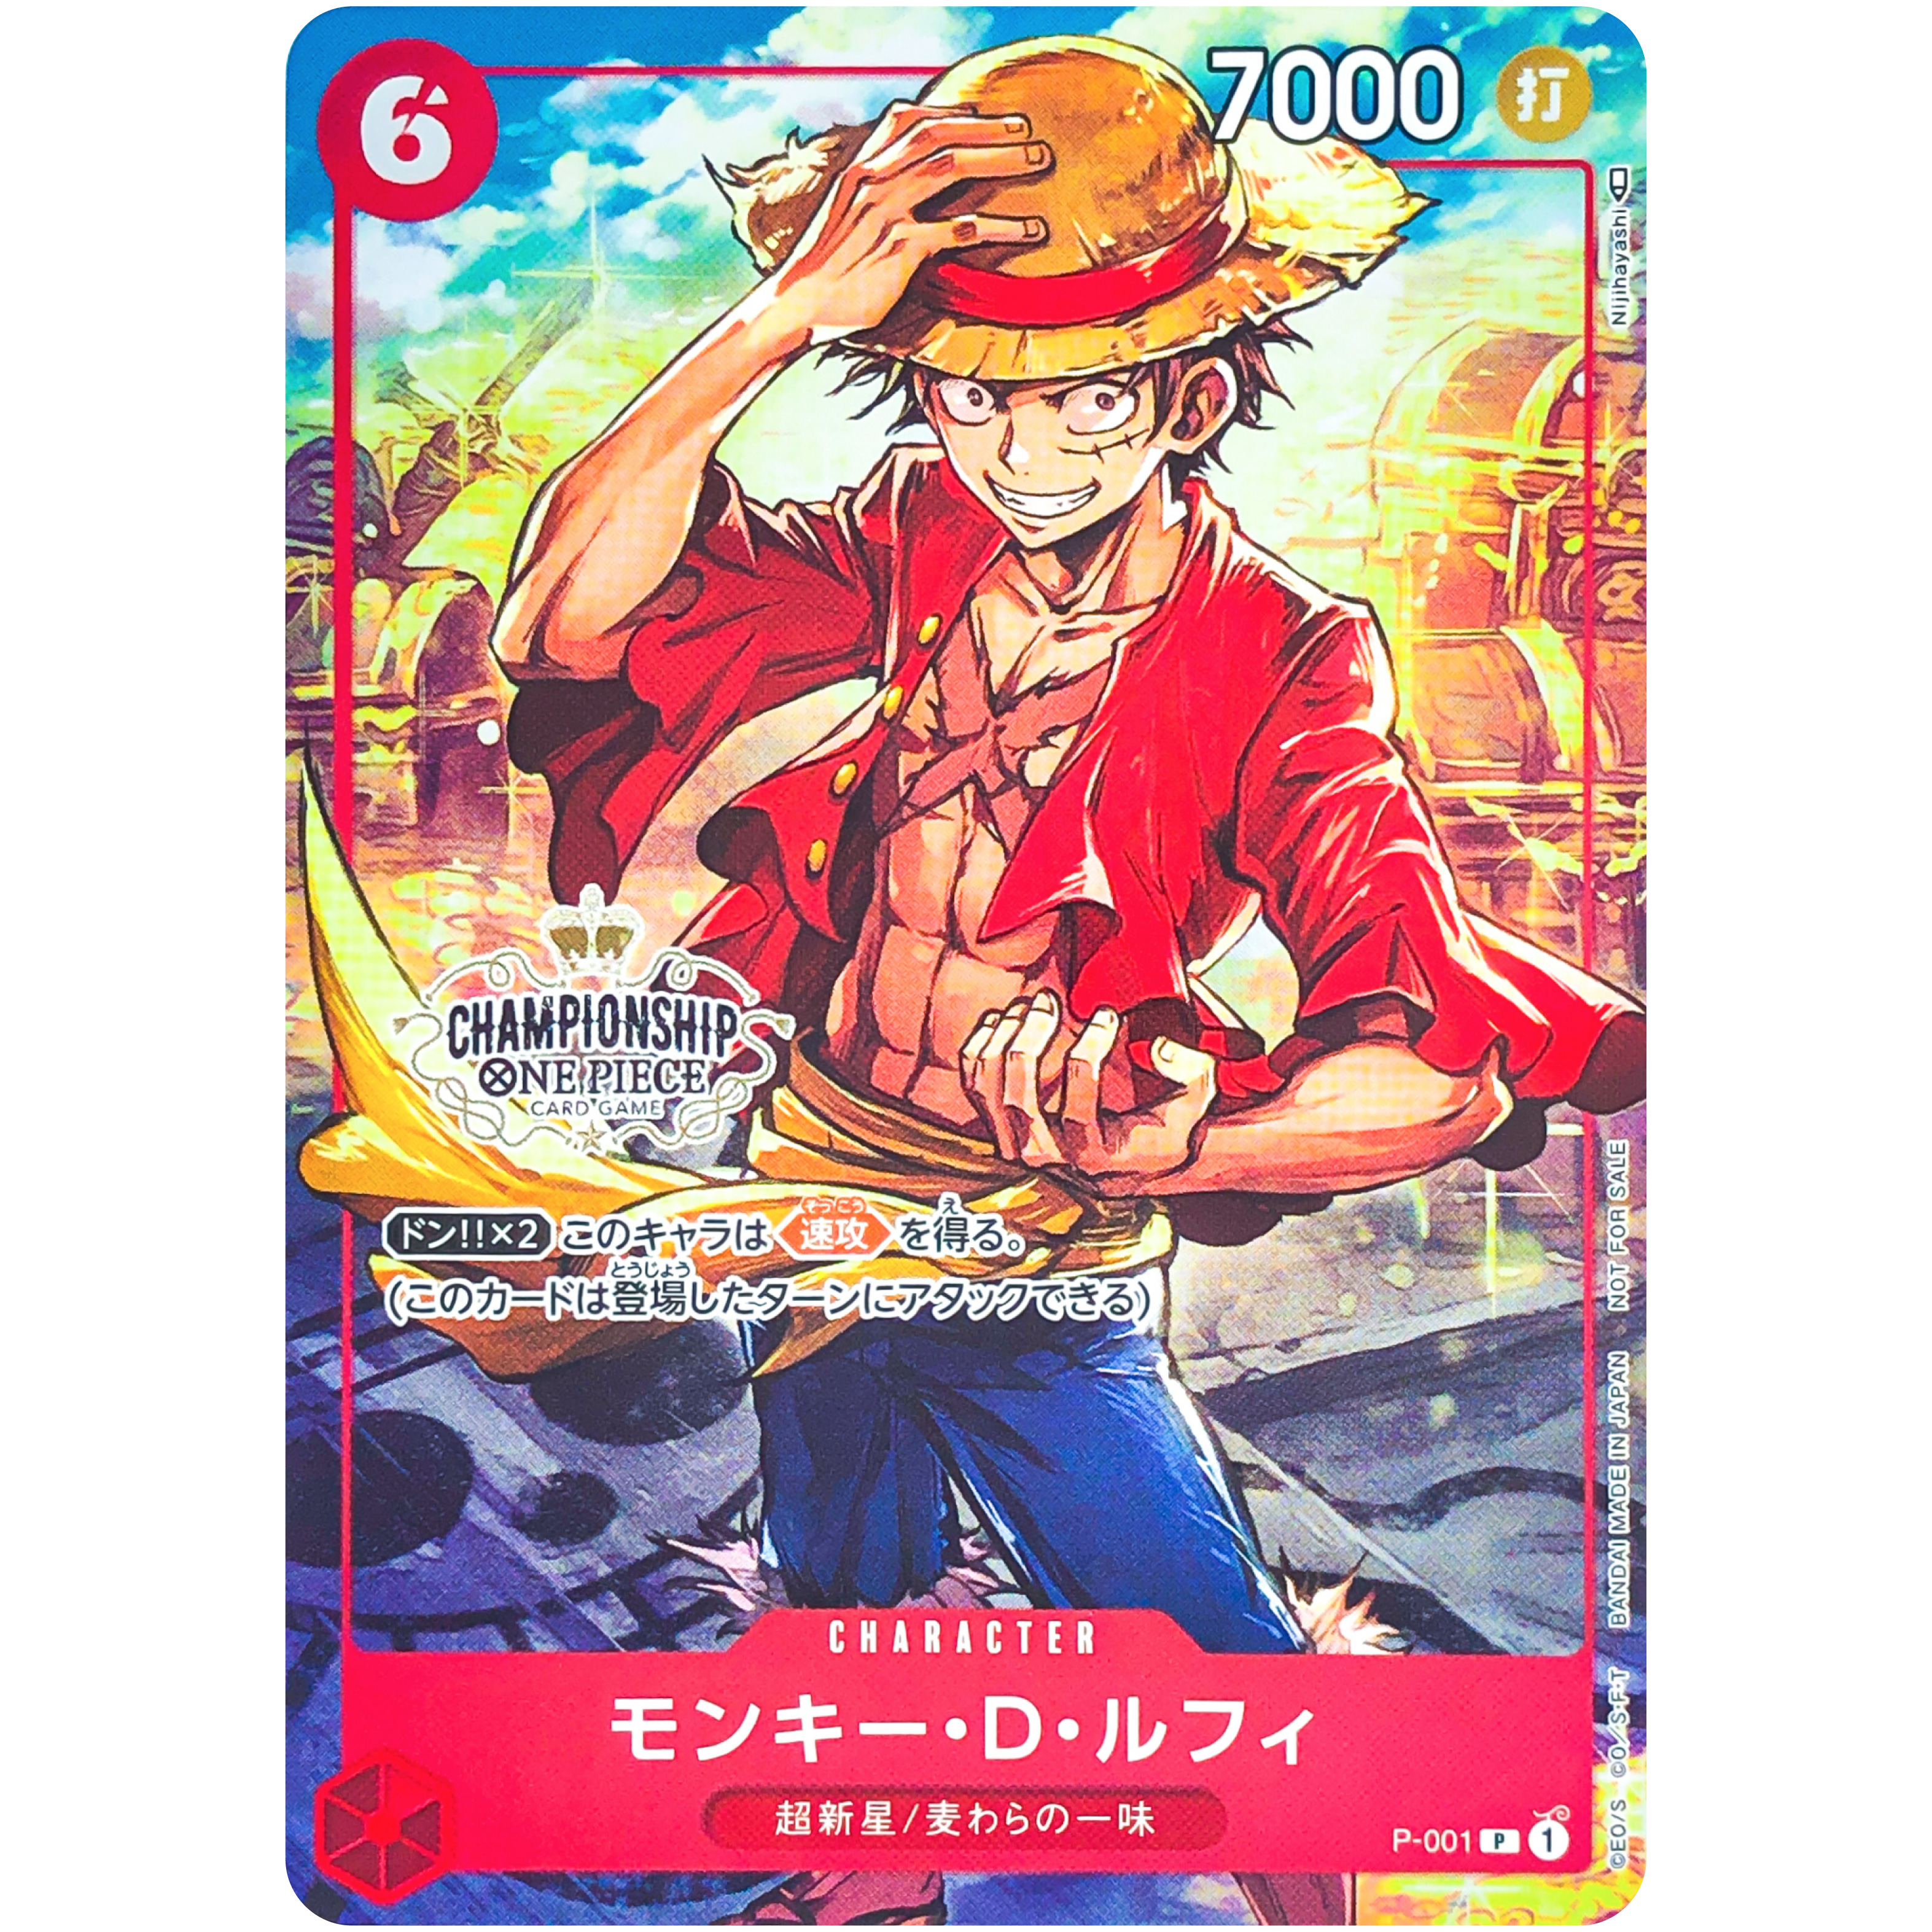 Original Bandai TCG One Piece Card Game Booster Box Luffy OPC-01 02 03  Cartoon Animation Battle Collectible Trading Card Toy